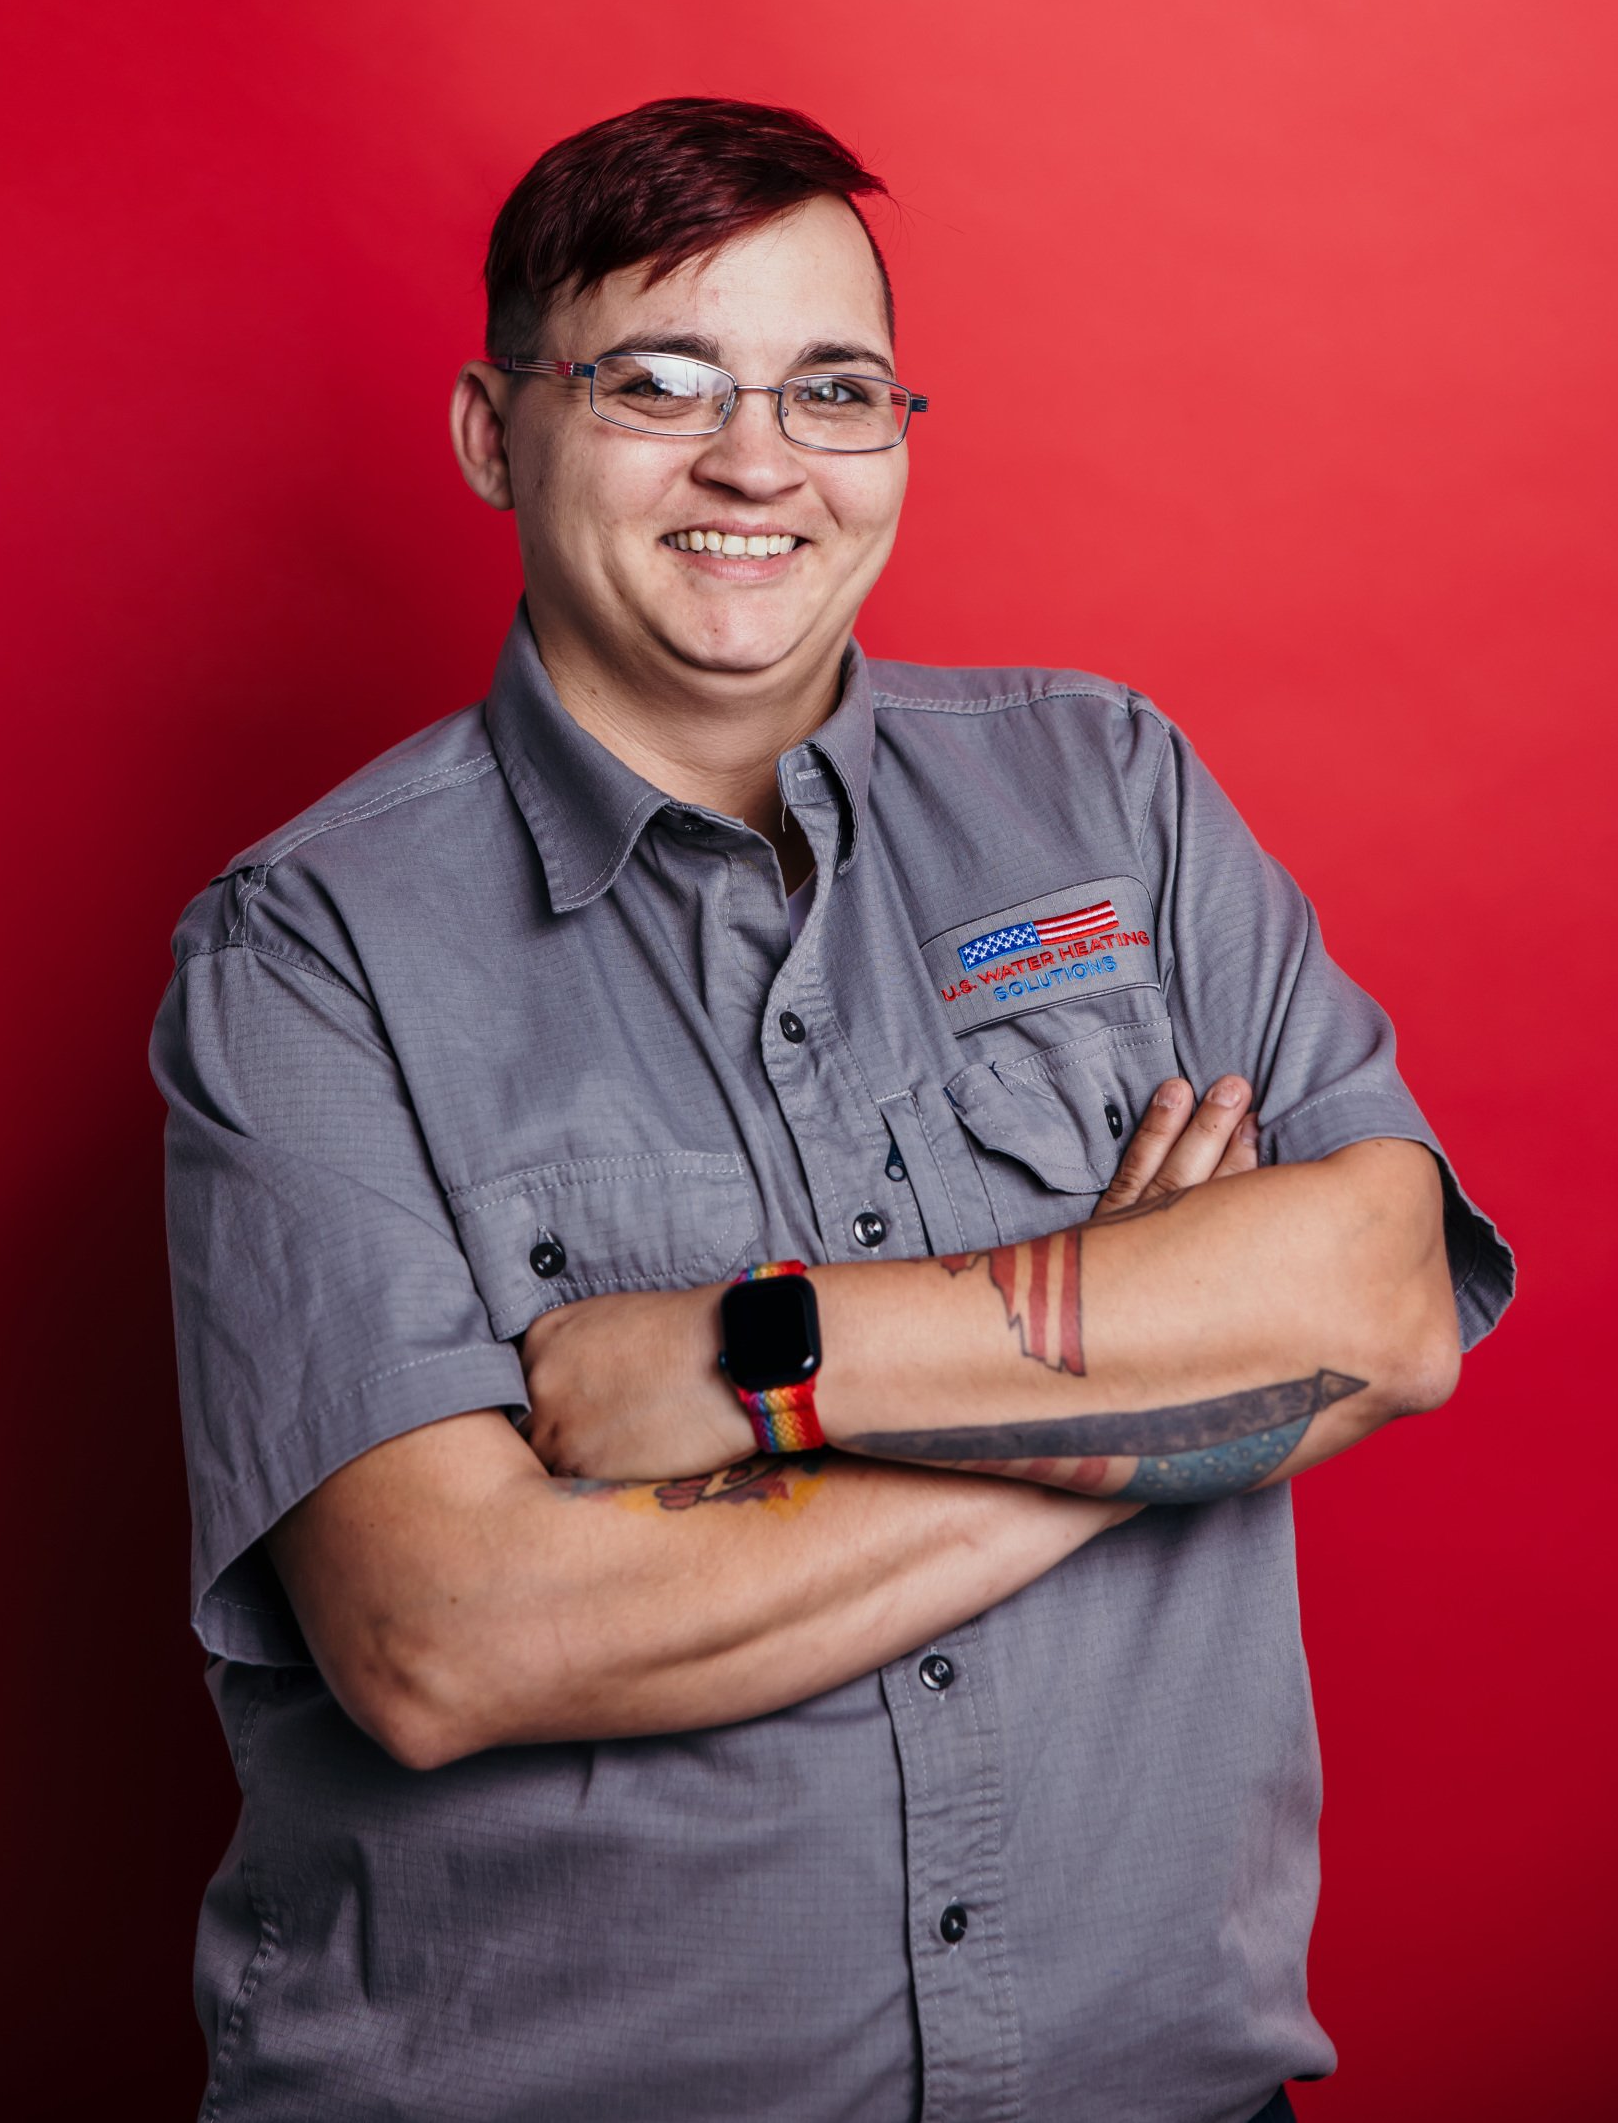 Water Heater Repair Technician Stacey Poses for Headshot with red background